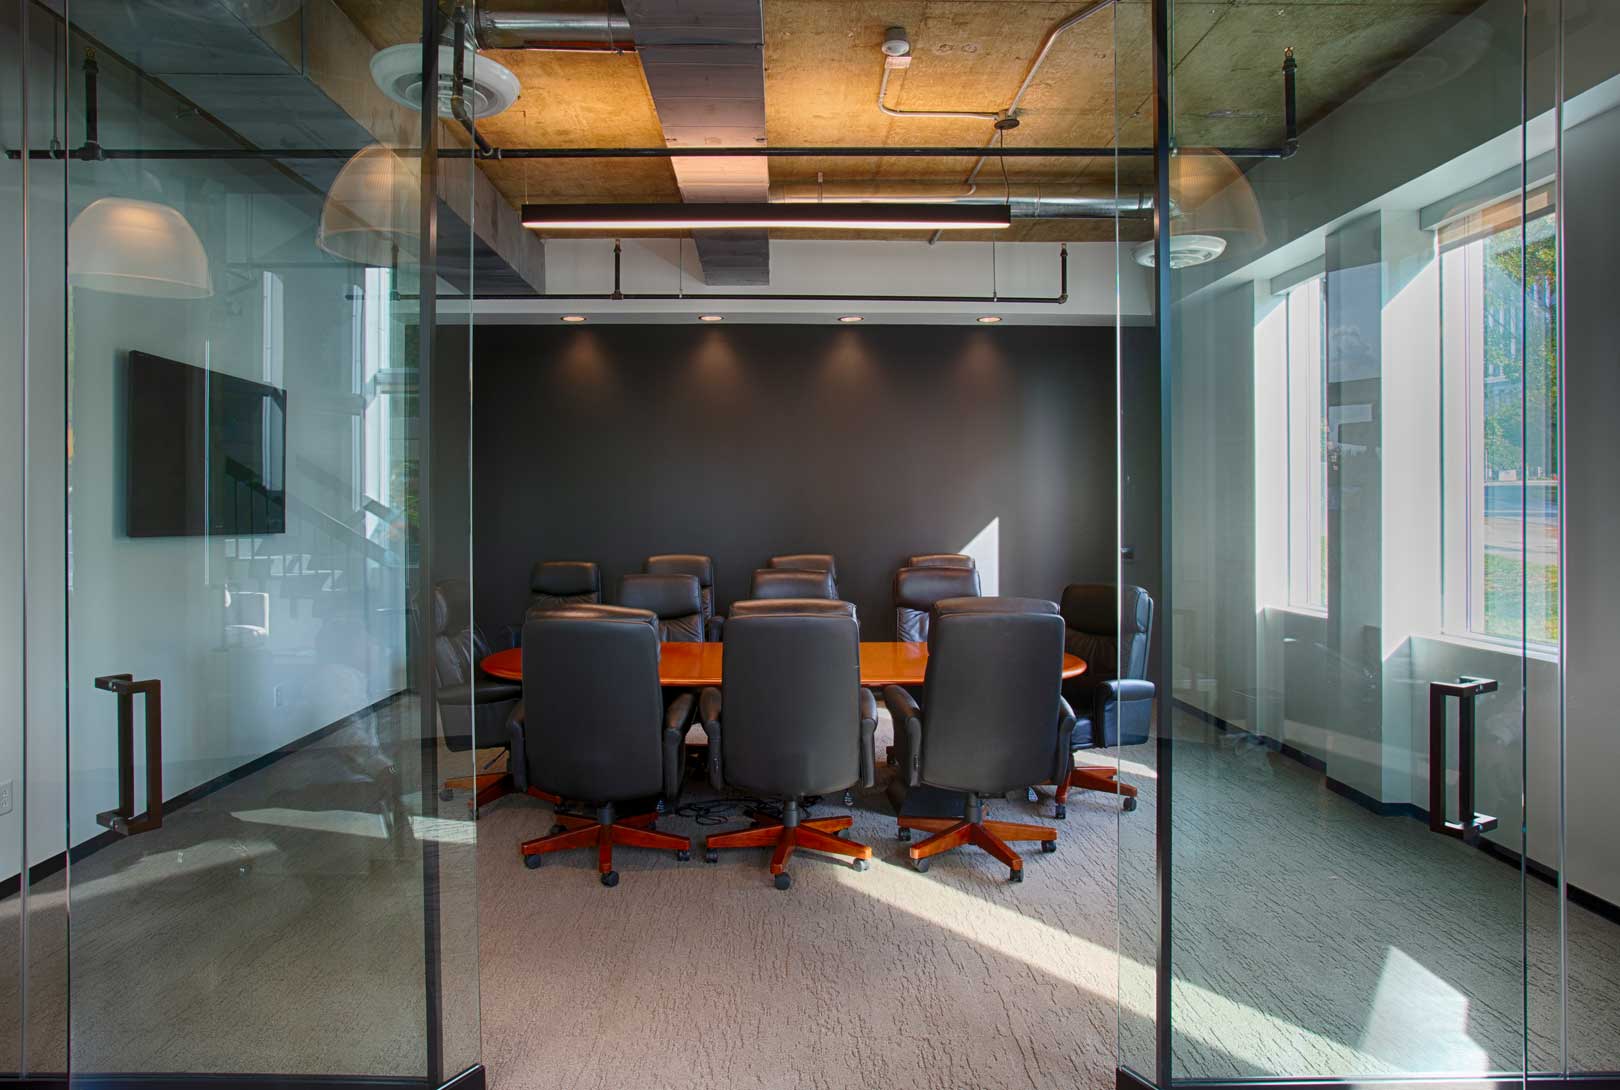 industrial designed conference room with concrete ceiling, glass entrance, painted white and gray with wood table